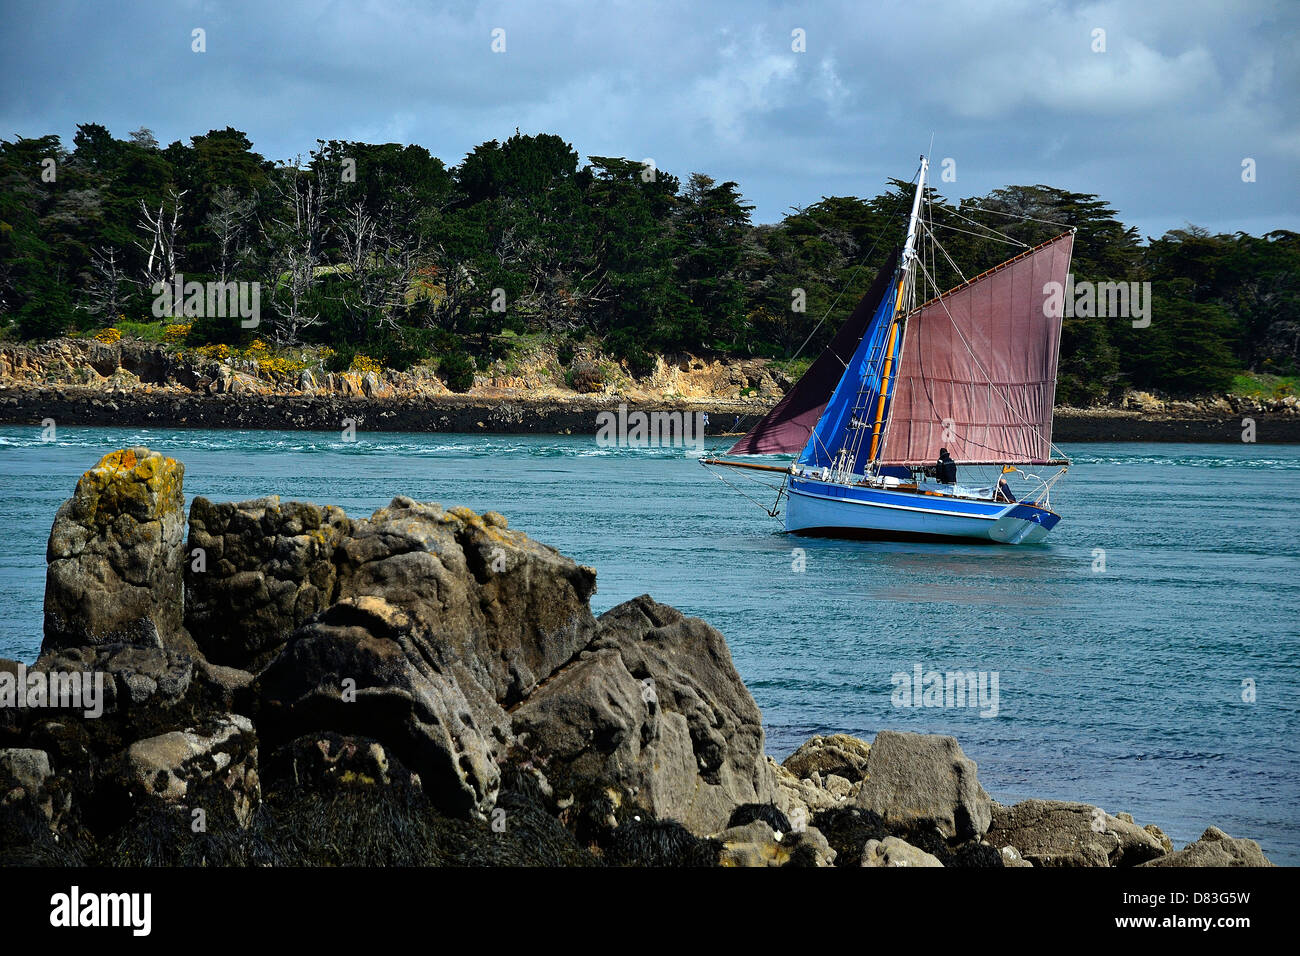 Babar, auric cutter, wooden boat, Morbihan gulf, here in front of 'Ile Longue' in Morbihan gulf, during maritime event. Stock Photo